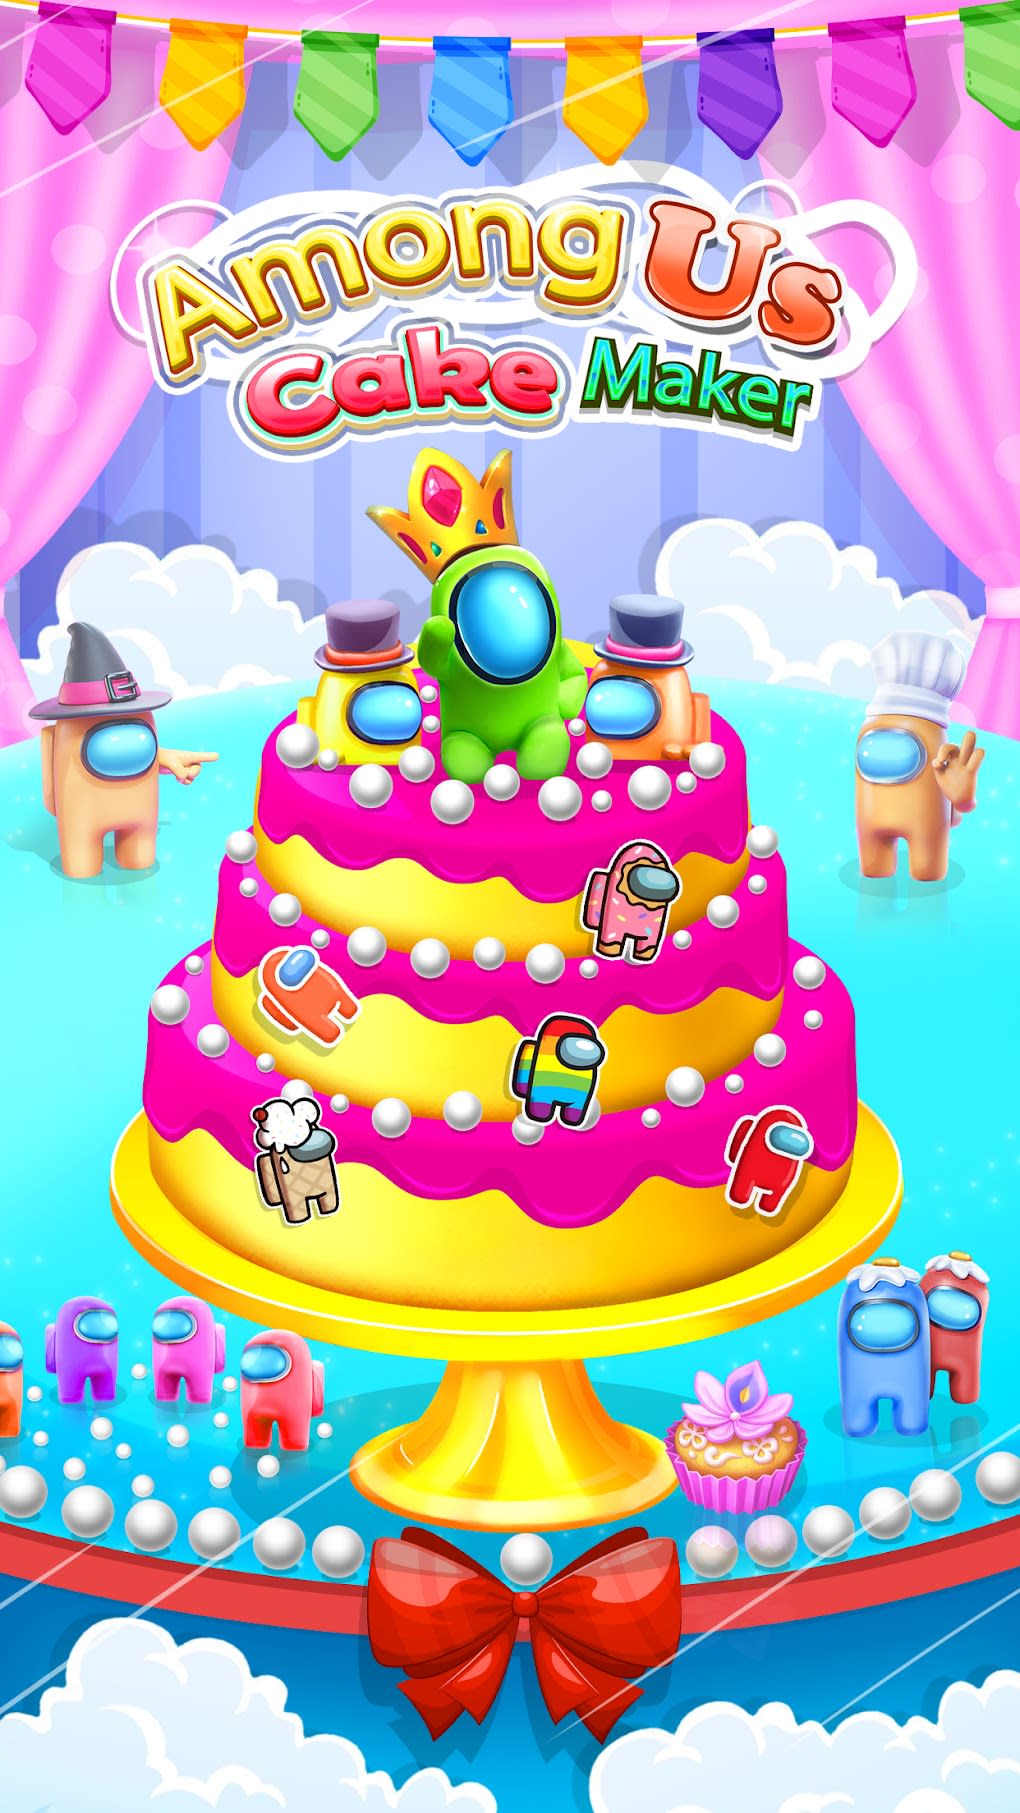 Top Free Online Games Tagged Cake , y8 games cooking - thirstymag.com